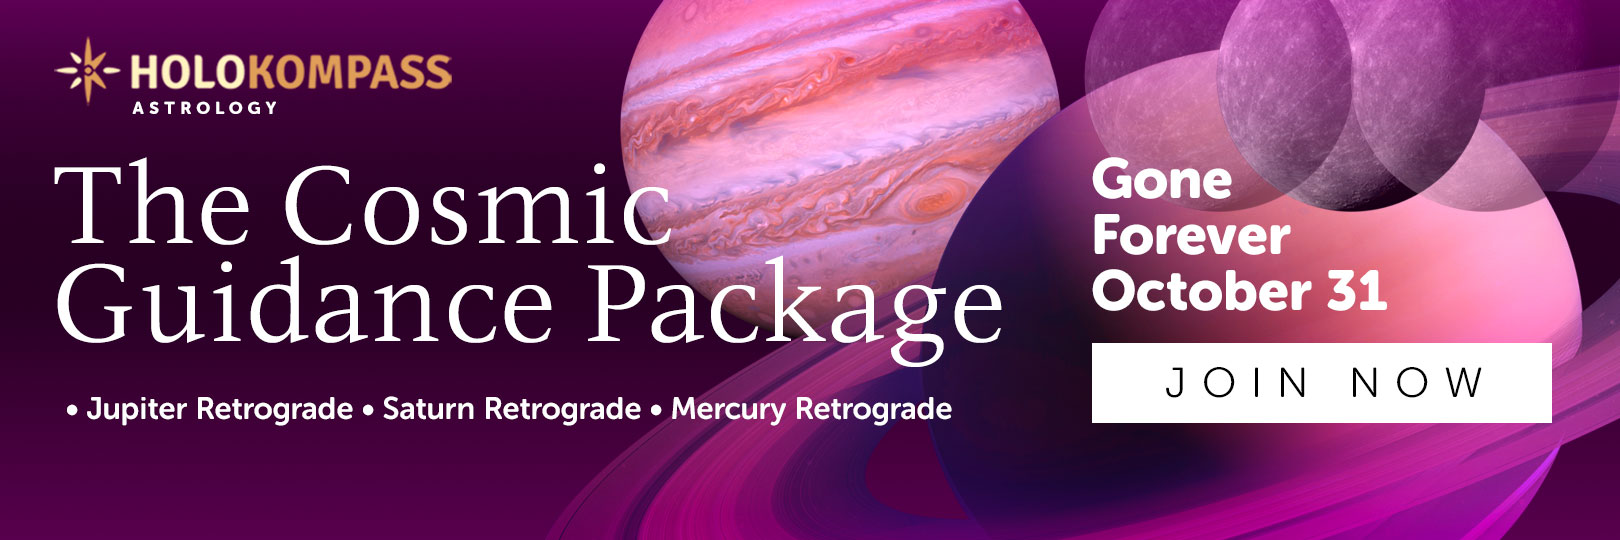 The Cosmic Guidance Package - Gone Forever Oct. 31! Join Now